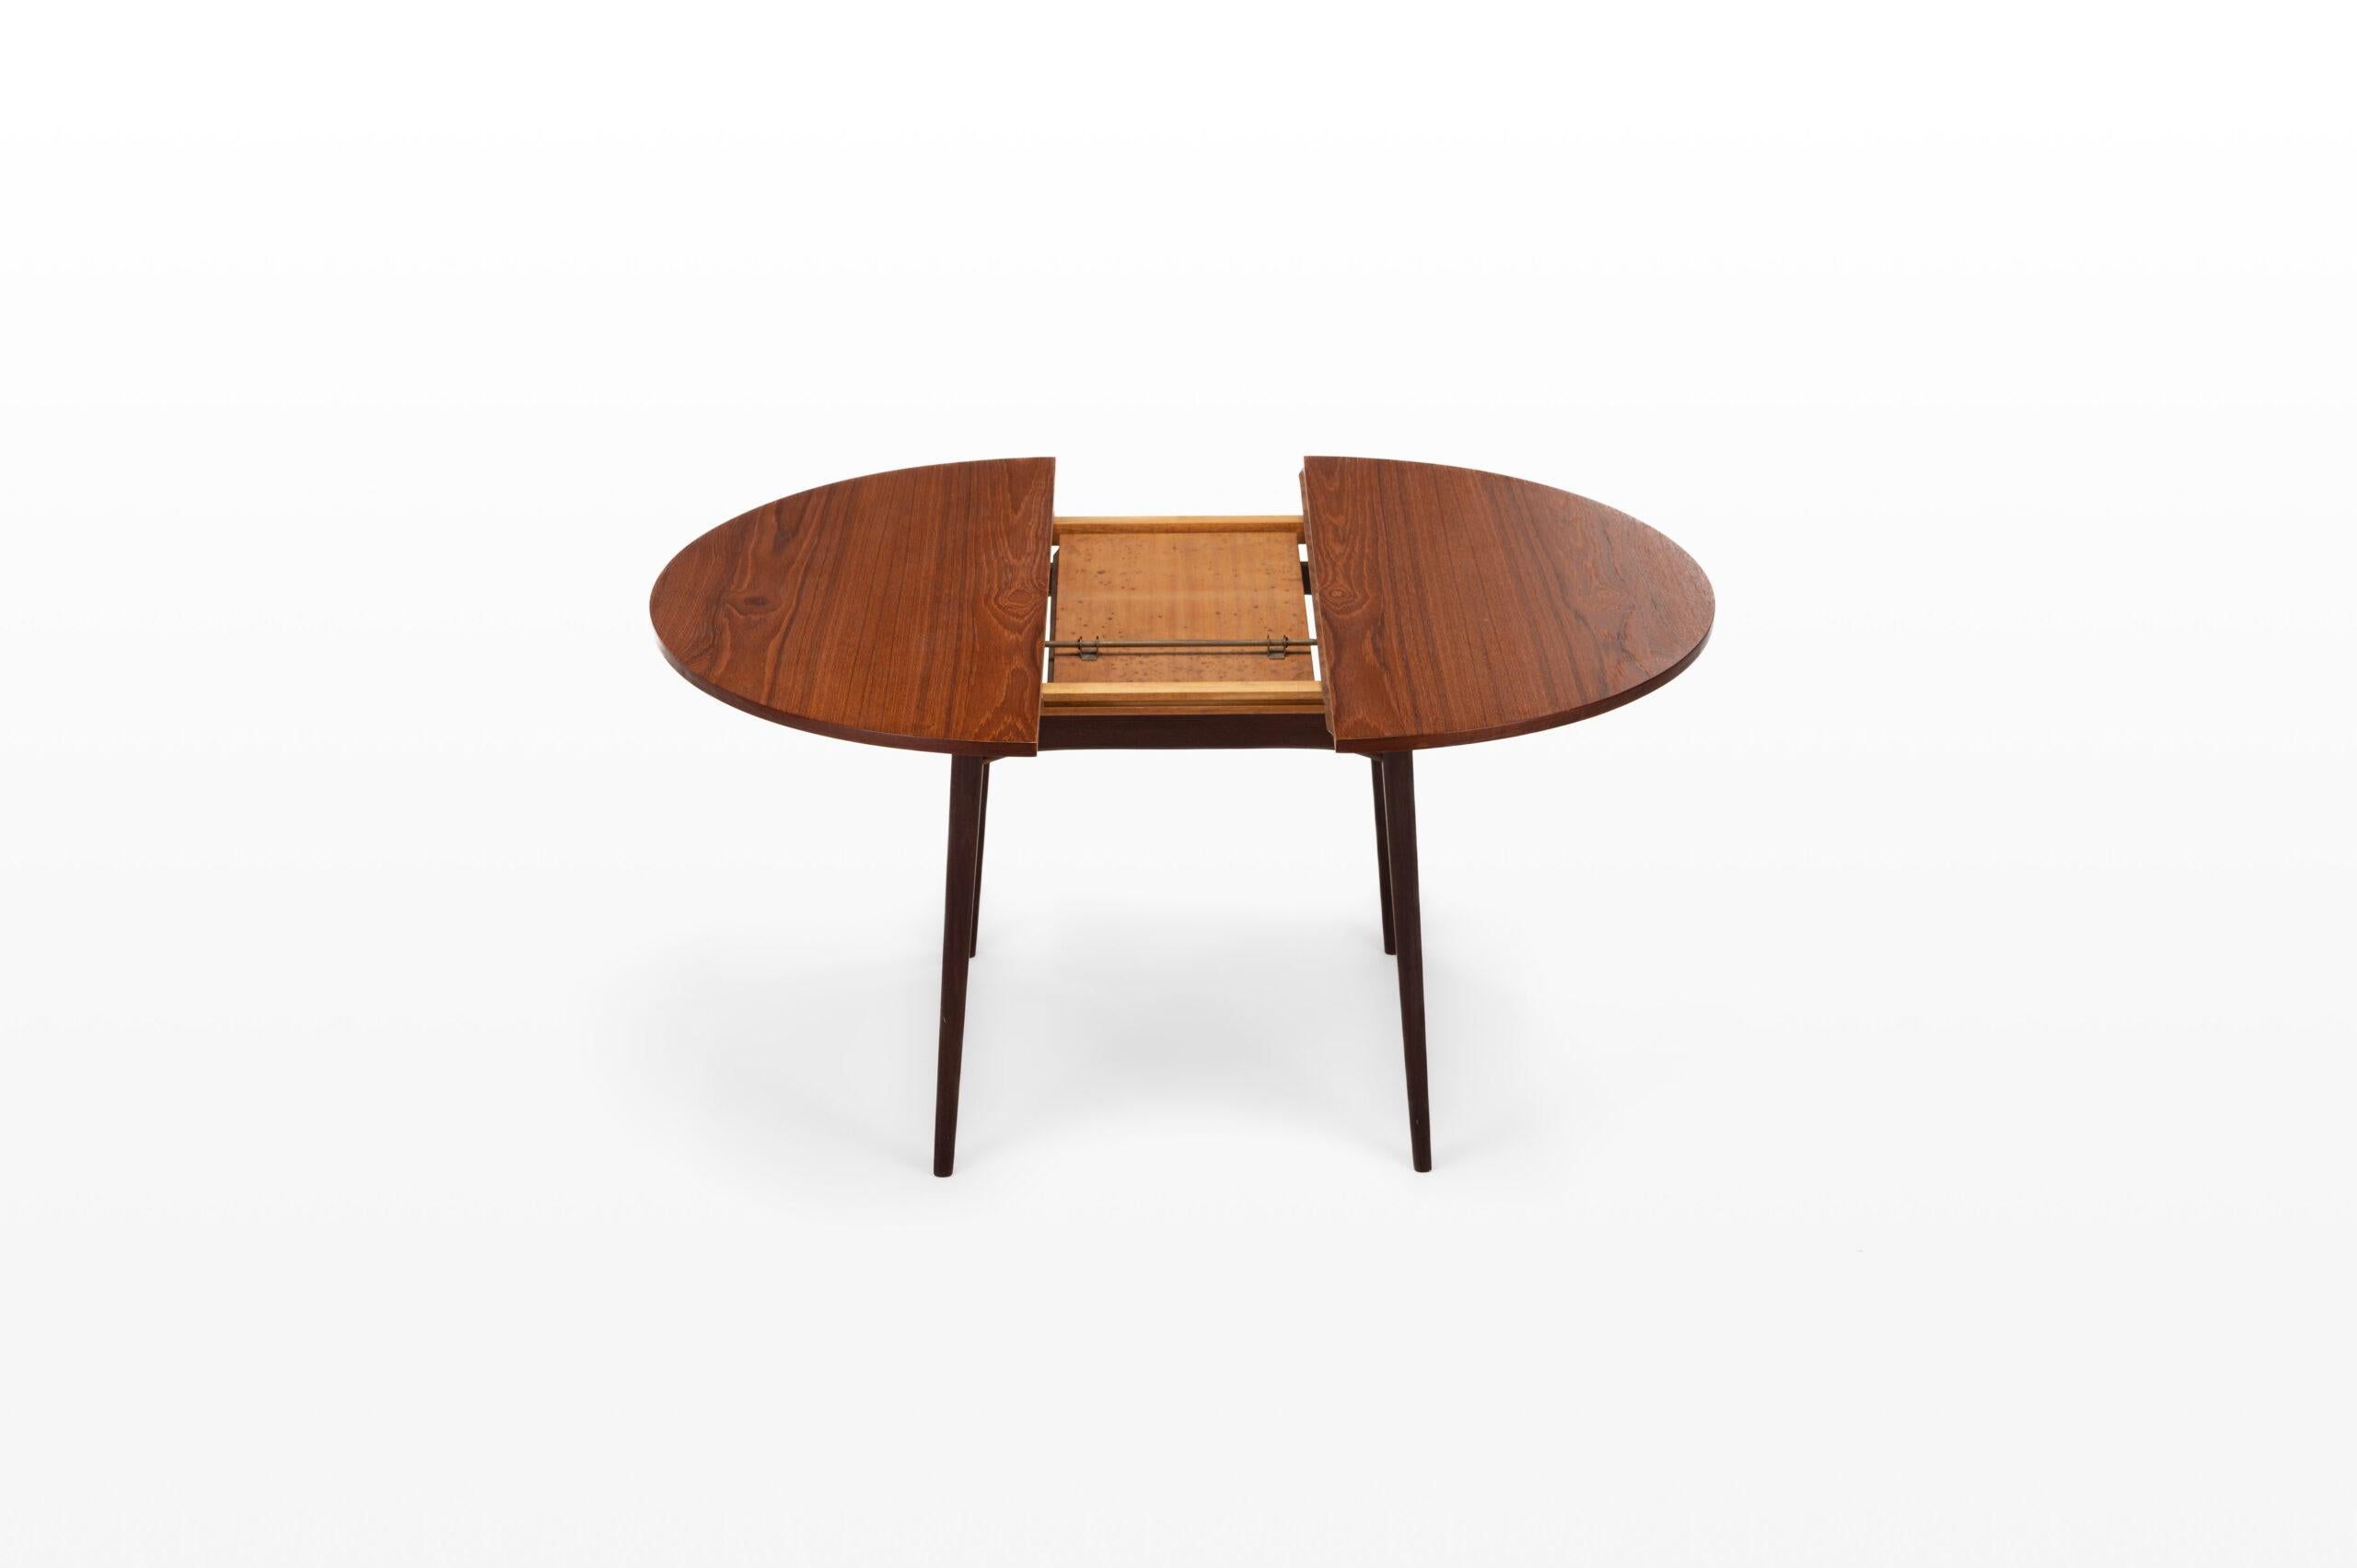 Beautiful round Dutch design extendable dining table by Louis van Teeffelen for Wébé. The table is made of teak and in very good condition.

Dimensions:
W: 110,5 – 145,5 cm
D: 110,5 cm
H: 75 cm.